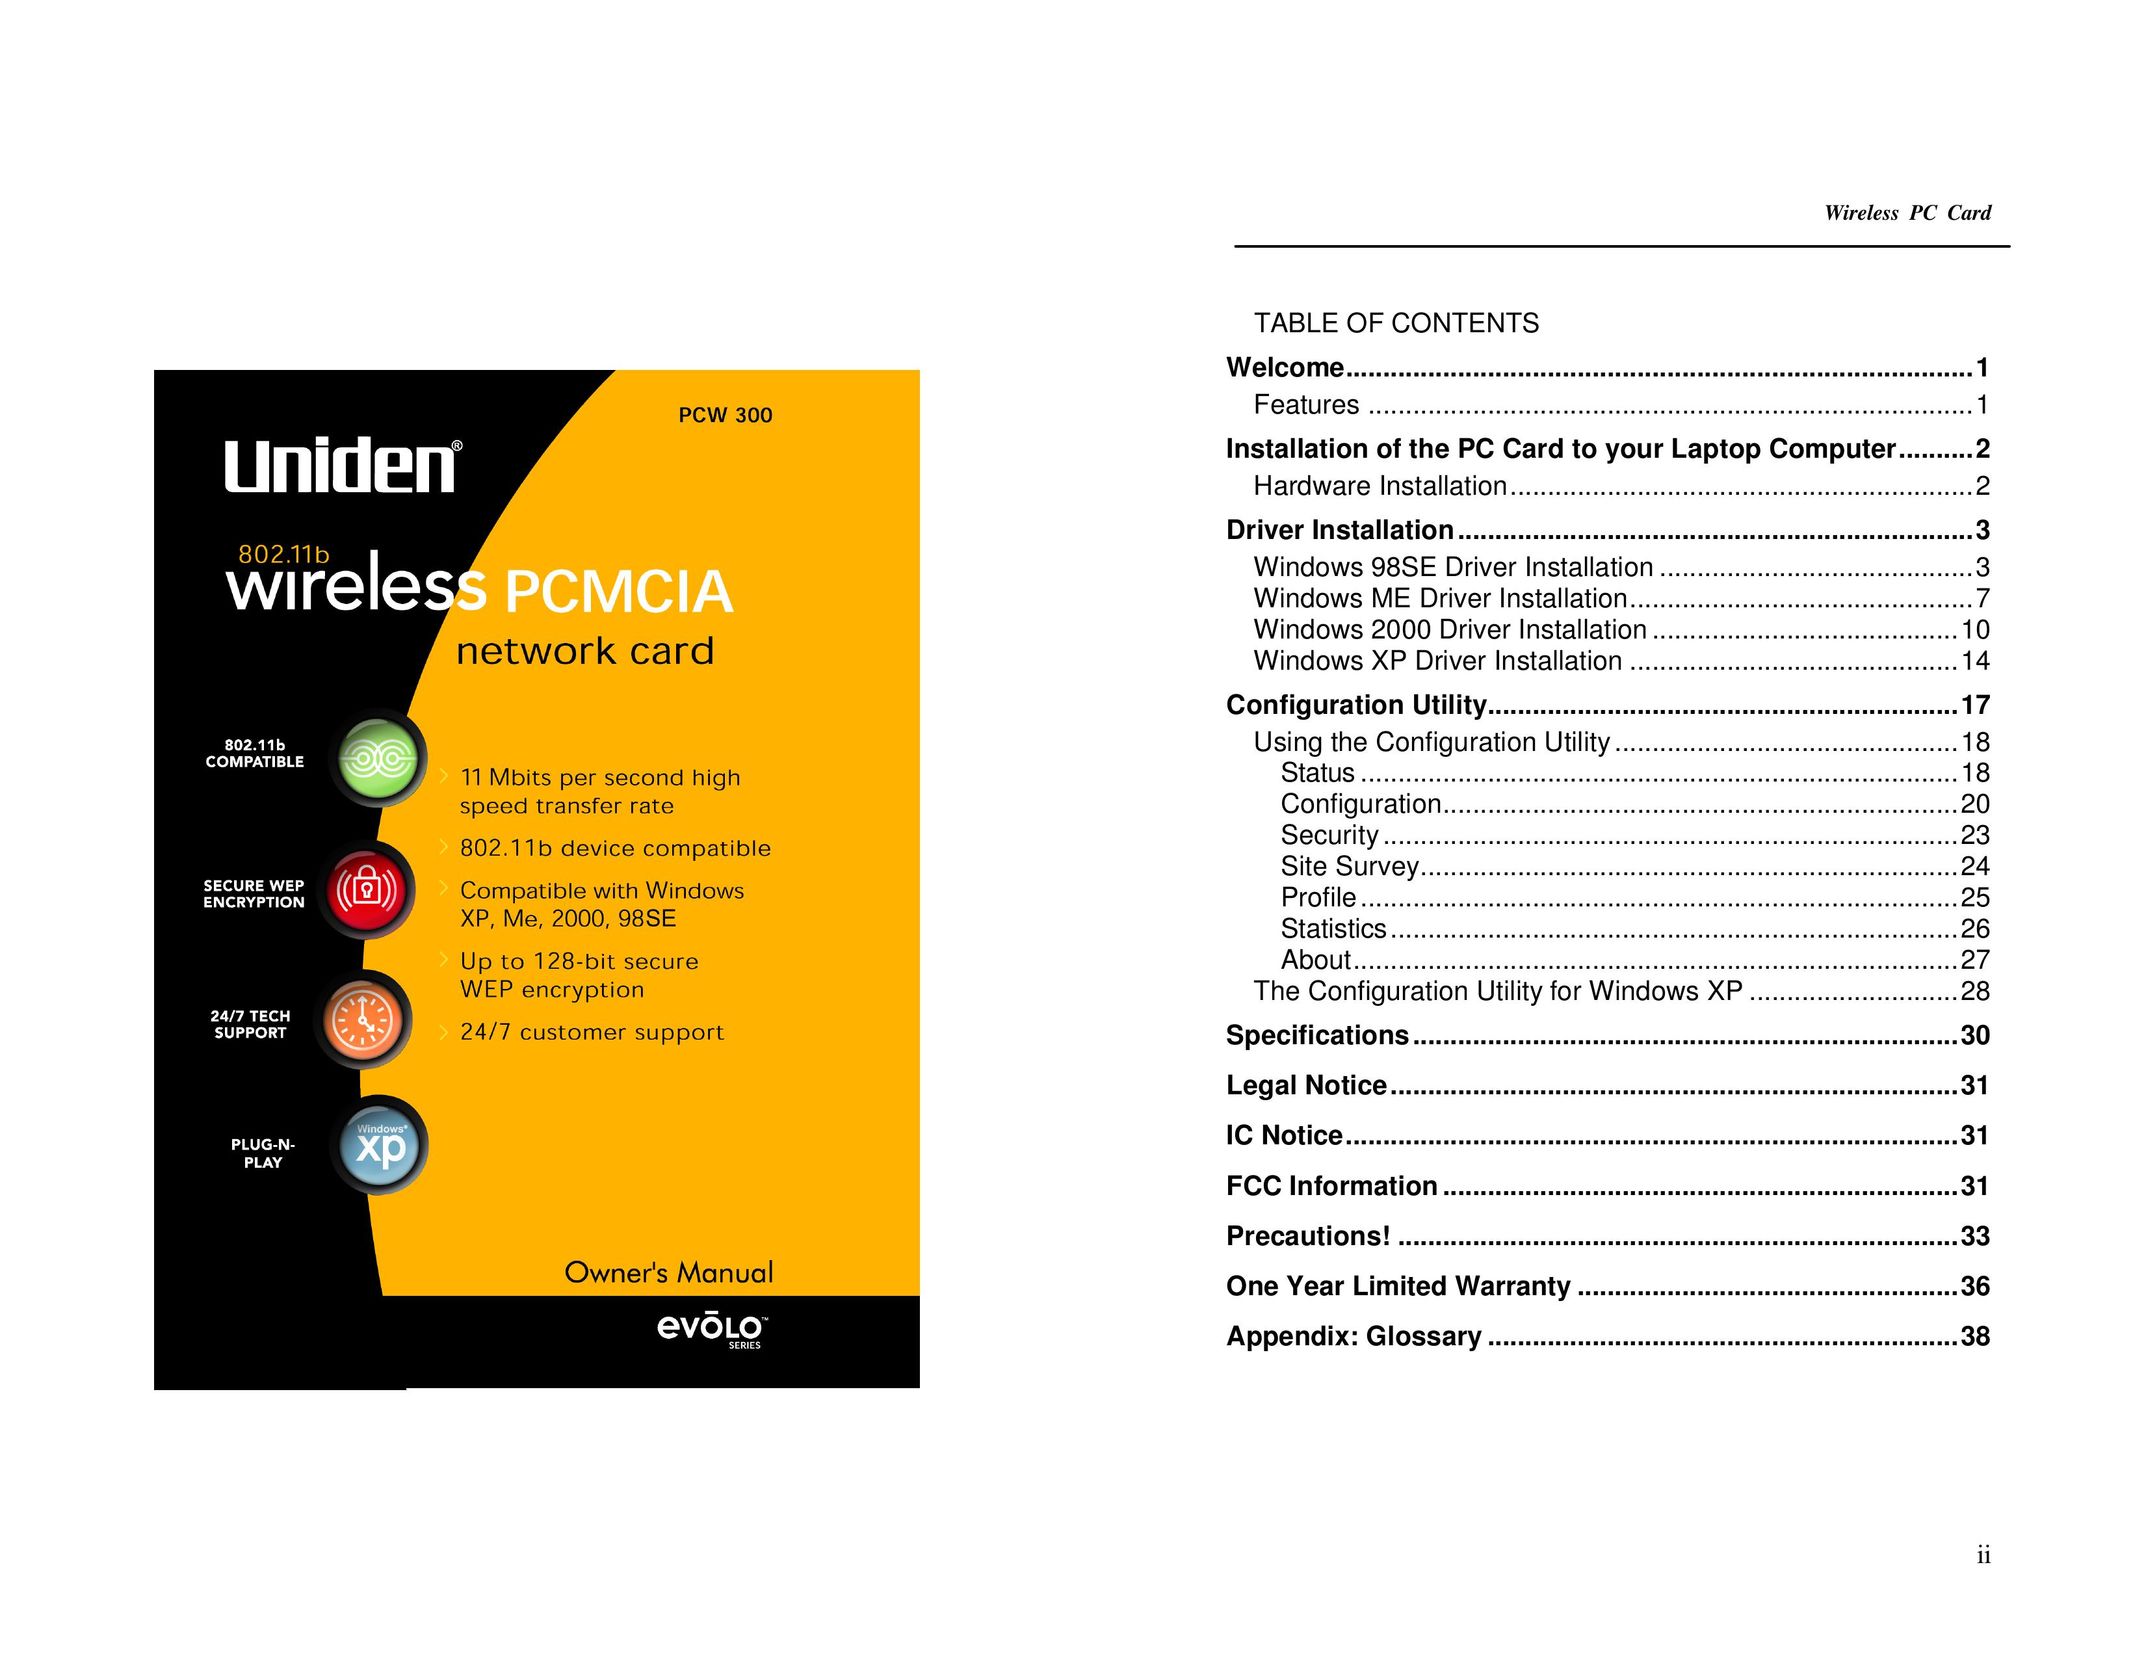 Uniden PCW300 Network Card User Manual